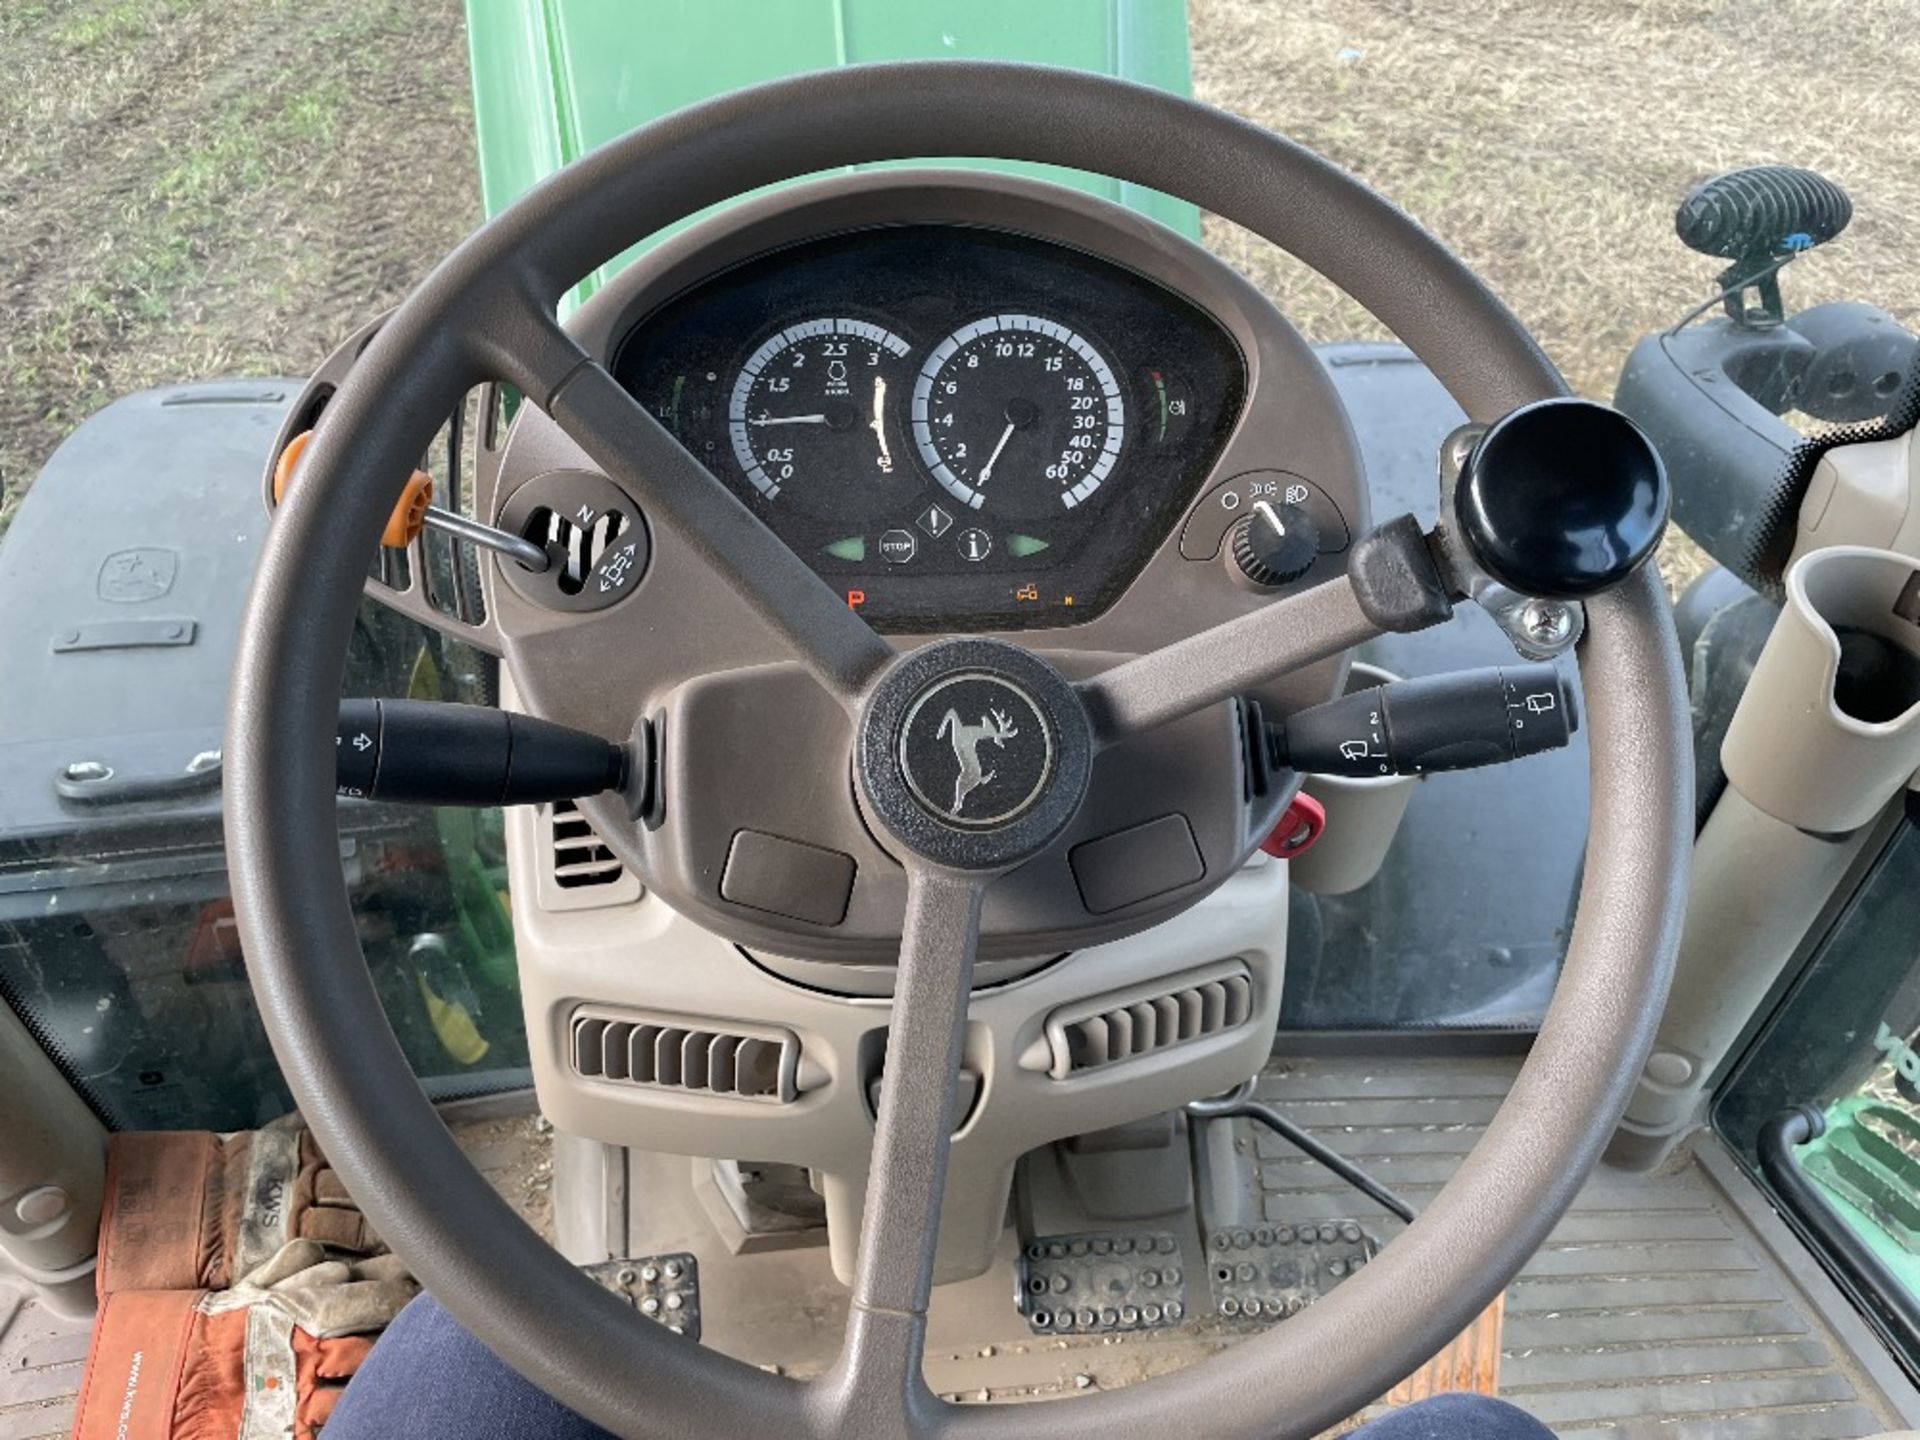 2018 John Deere 6195R 4wd Tractor (Ultimate Edition), approx. 1848 hours, Reg No. - Image 16 of 19